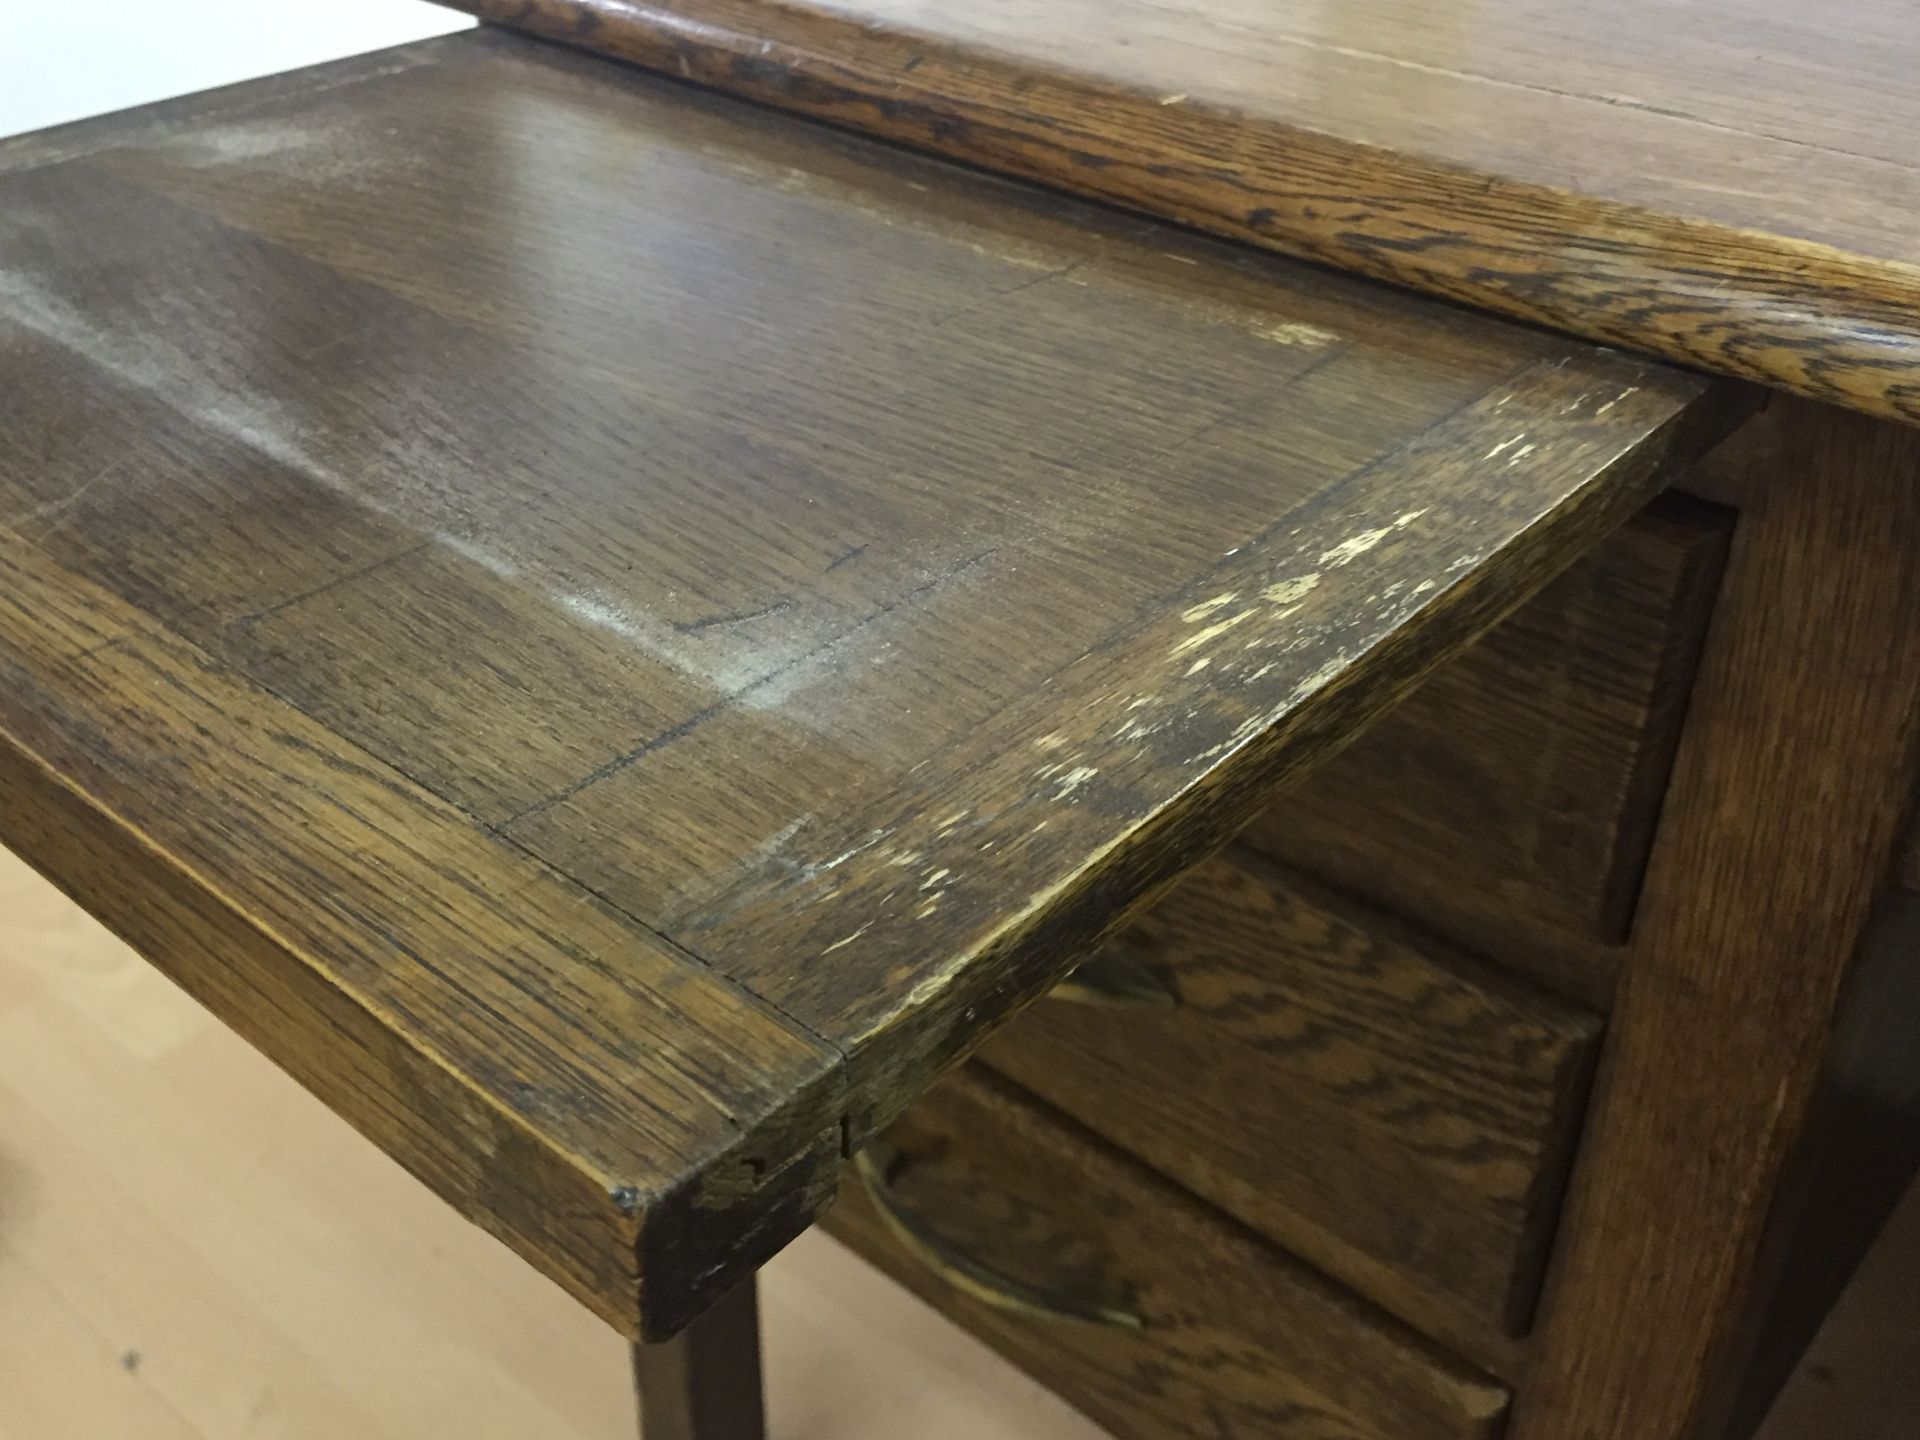 1 x Attractive Writing Desk - CL171 - Location: London, N4 - Image 7 of 8